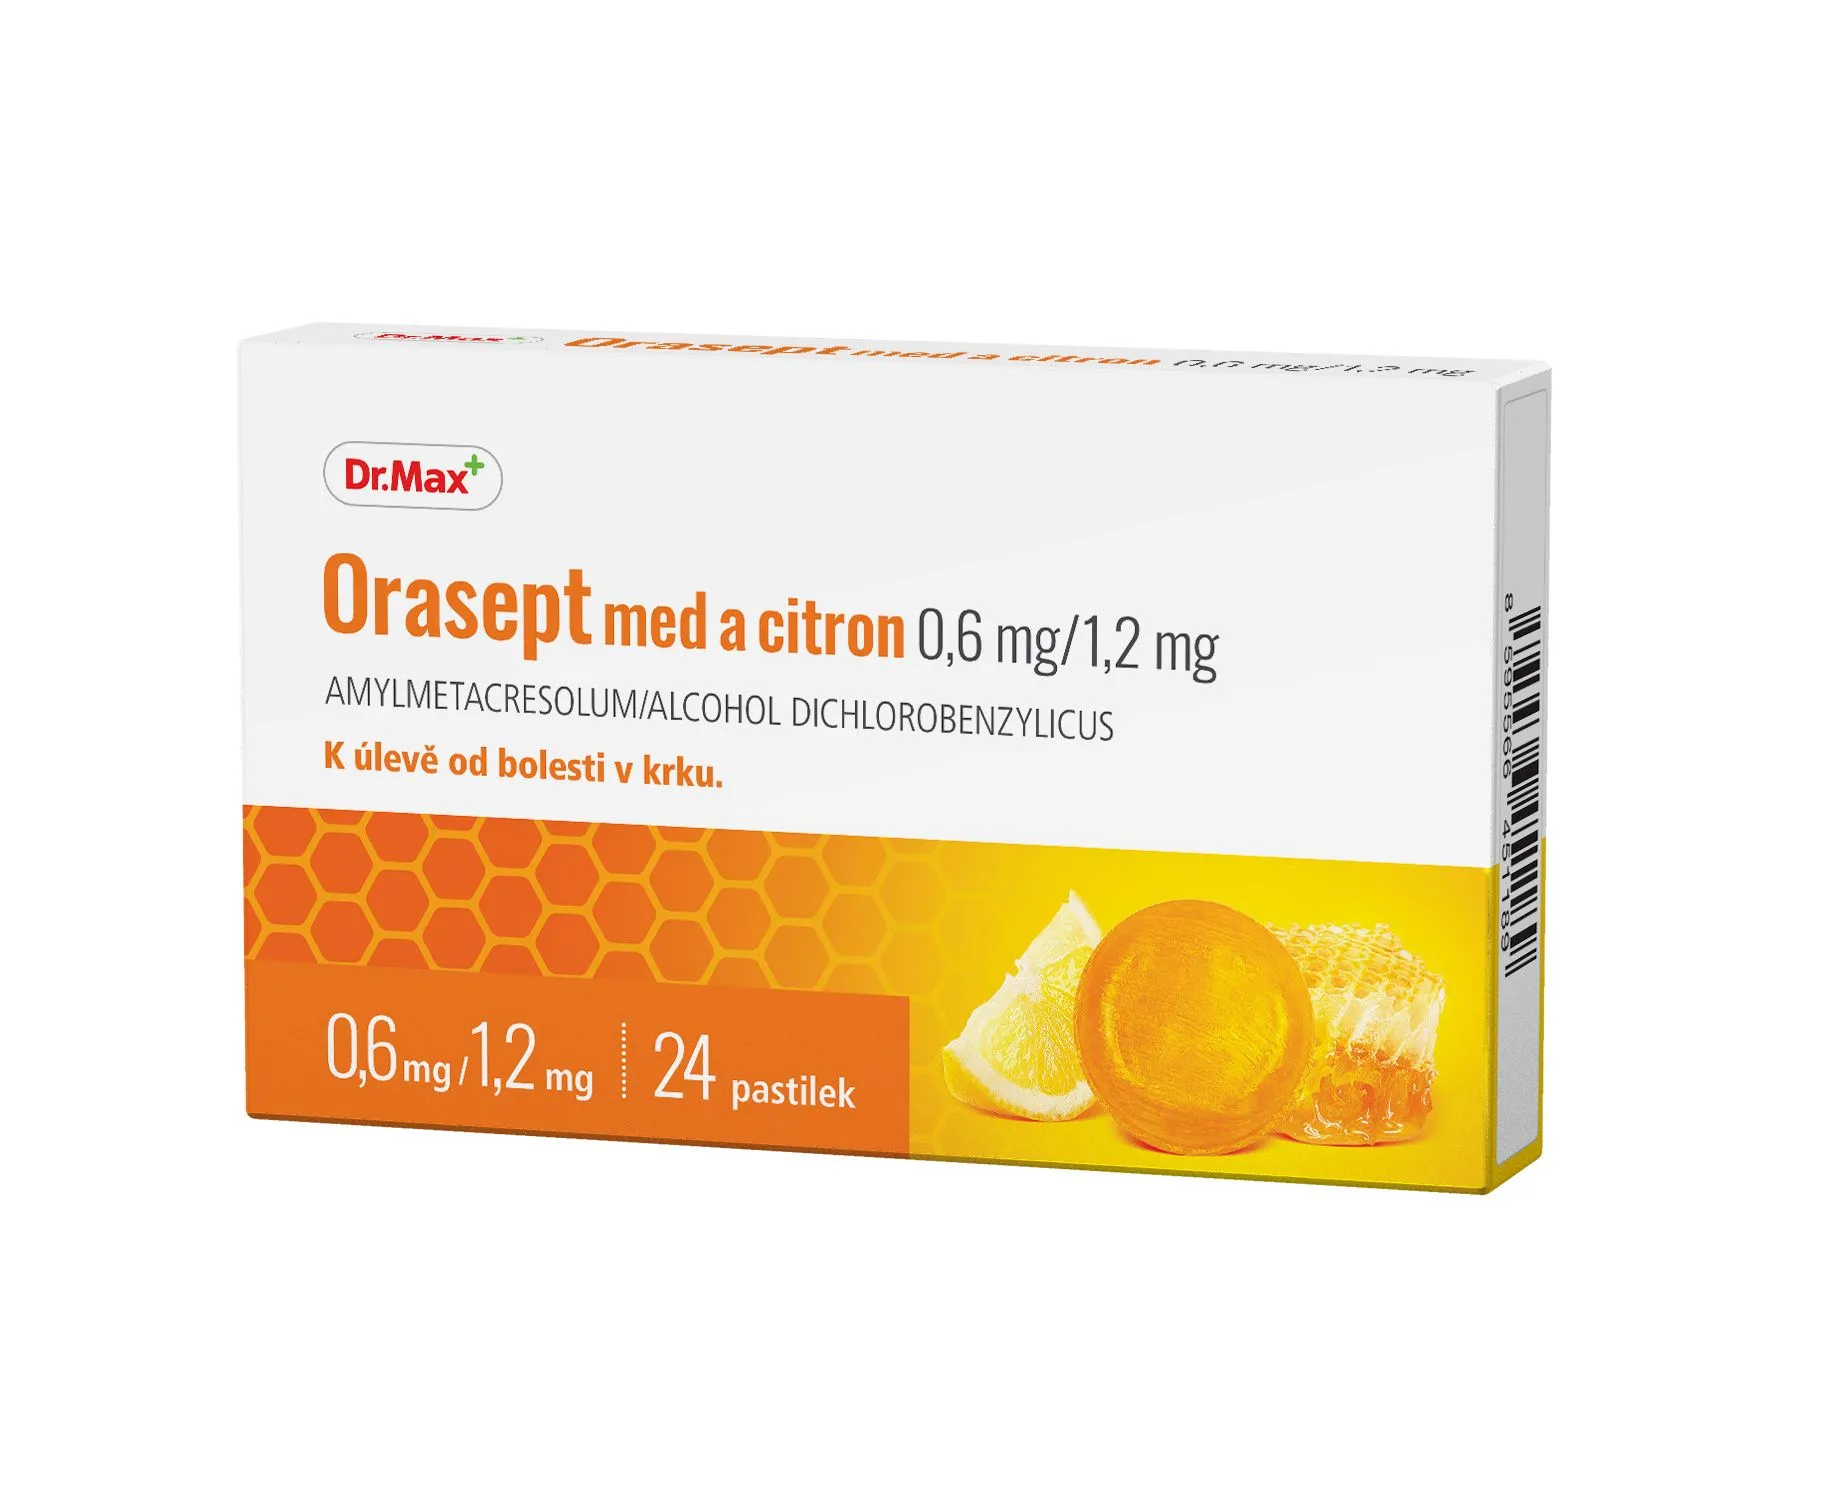 Dr.Max Orasept med a citron 0,6 mg/1,2 mg